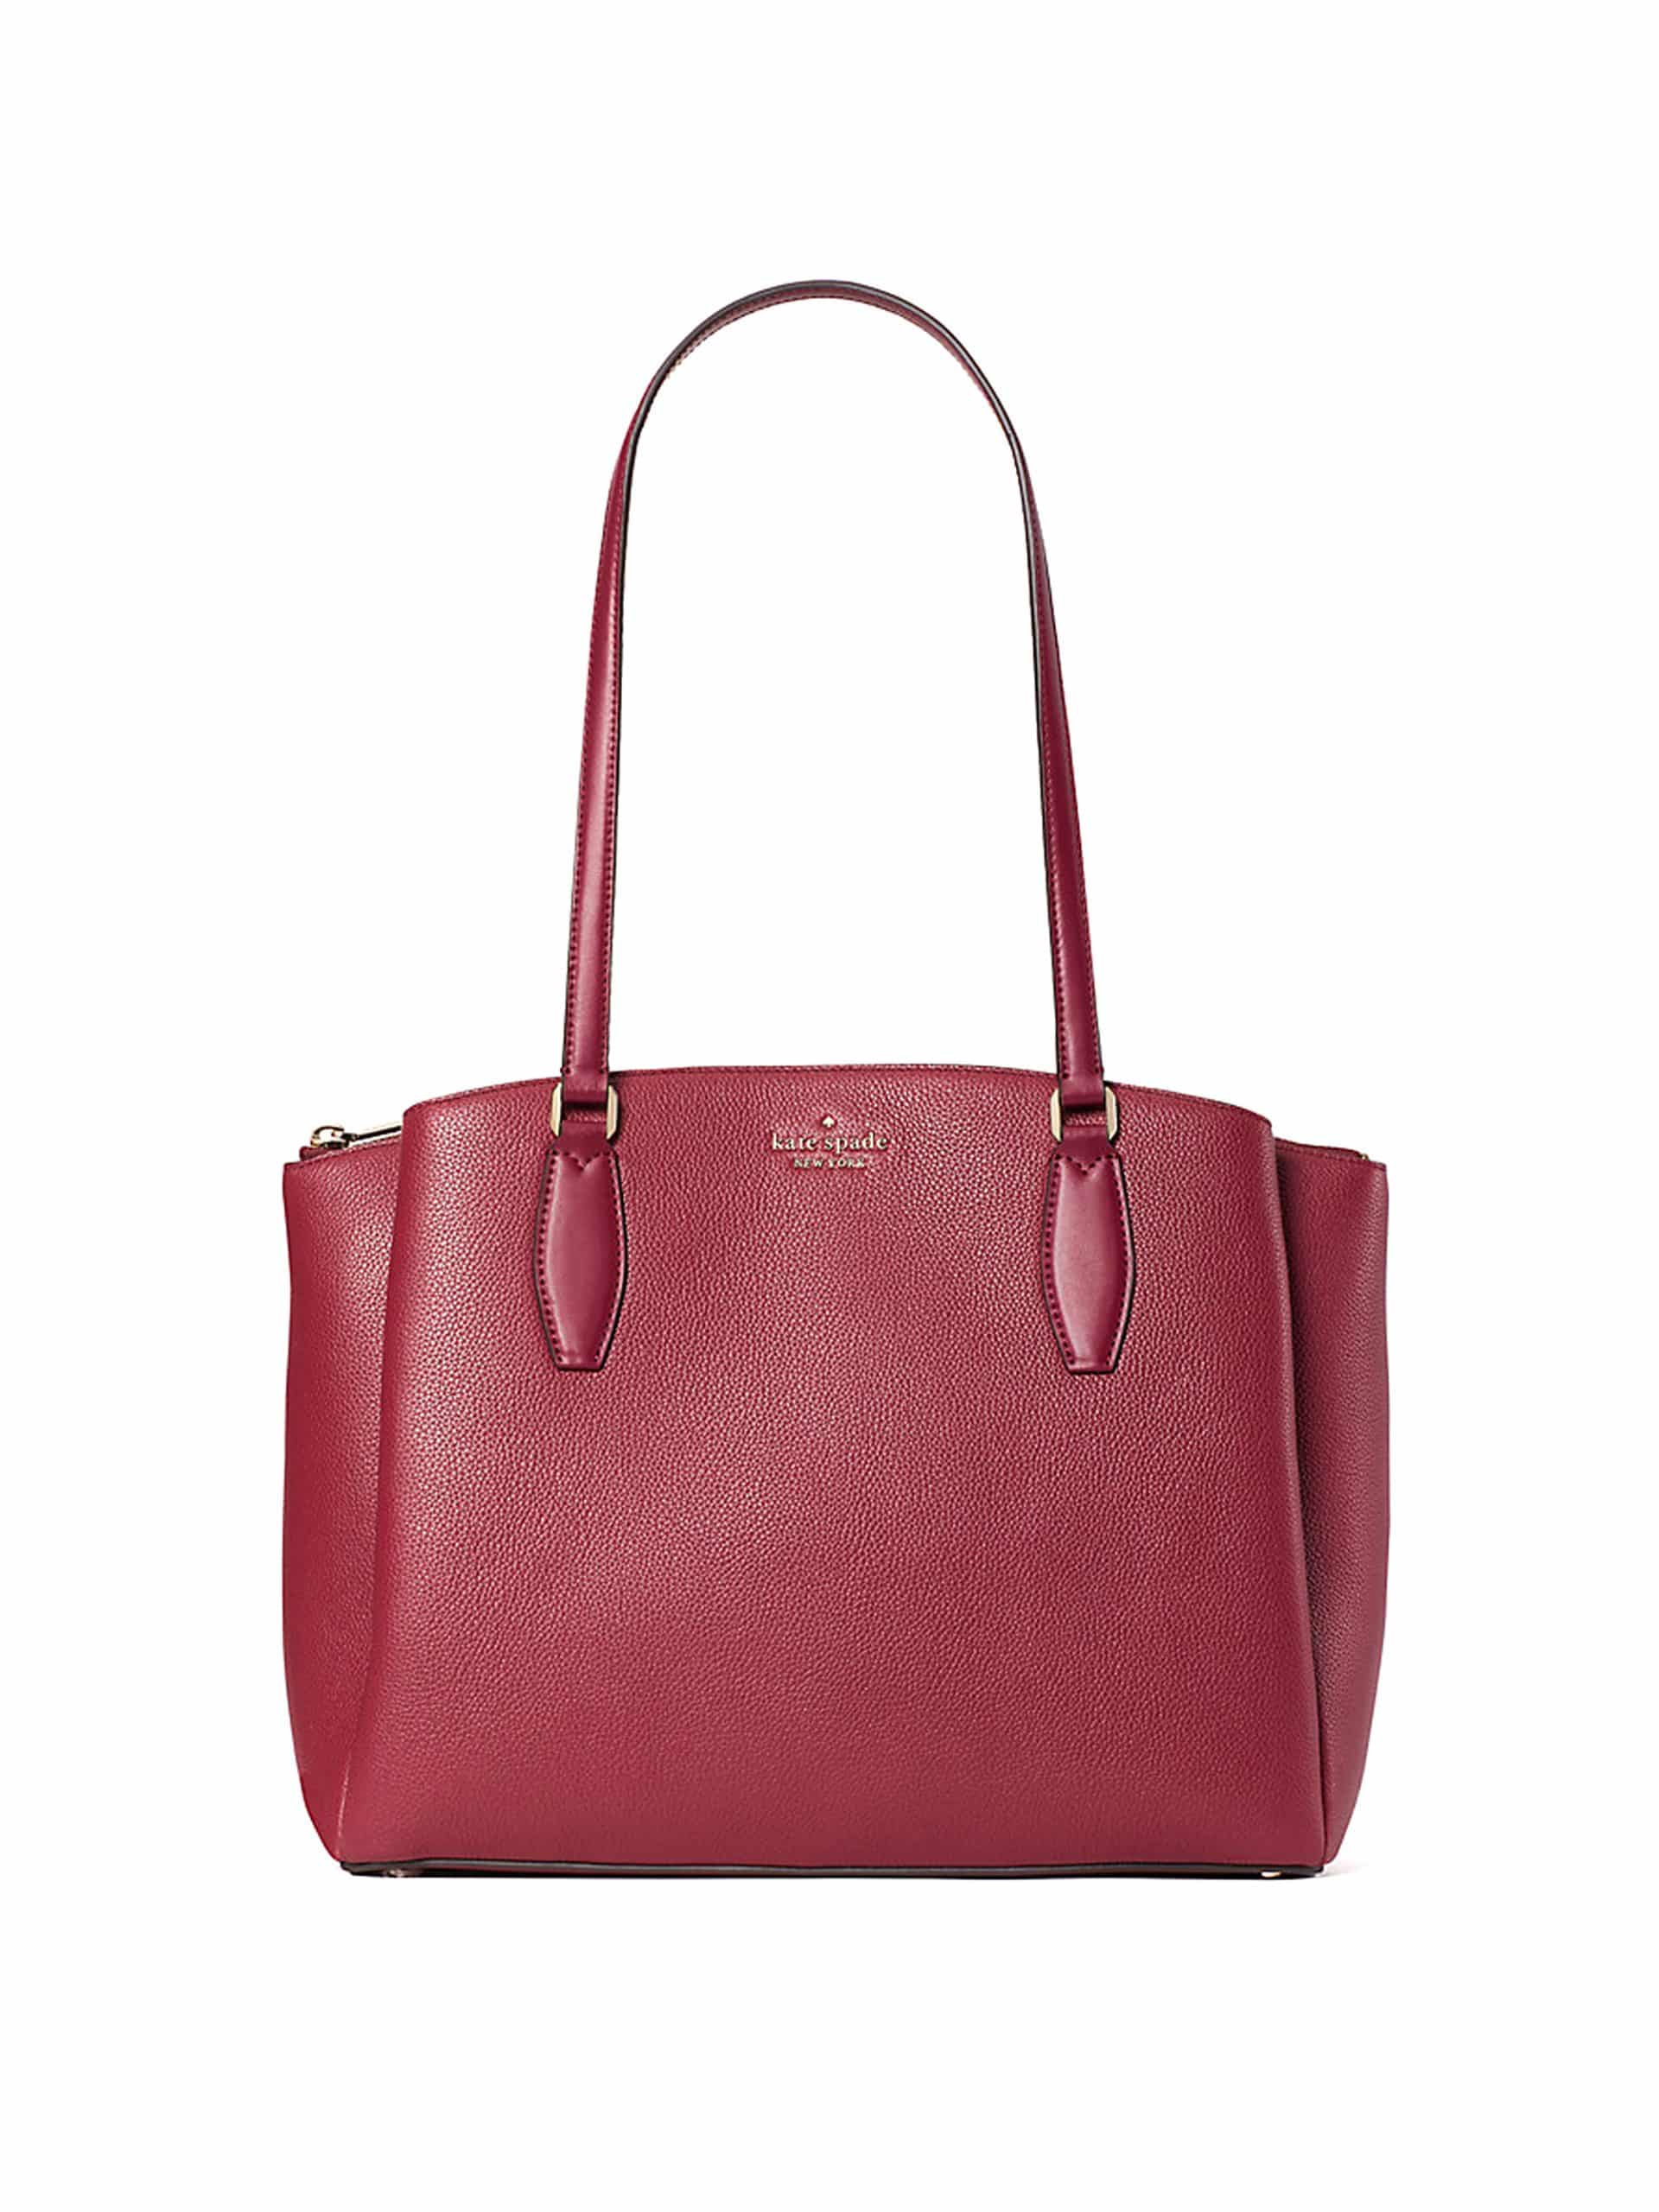 kate spade triple compartment tote